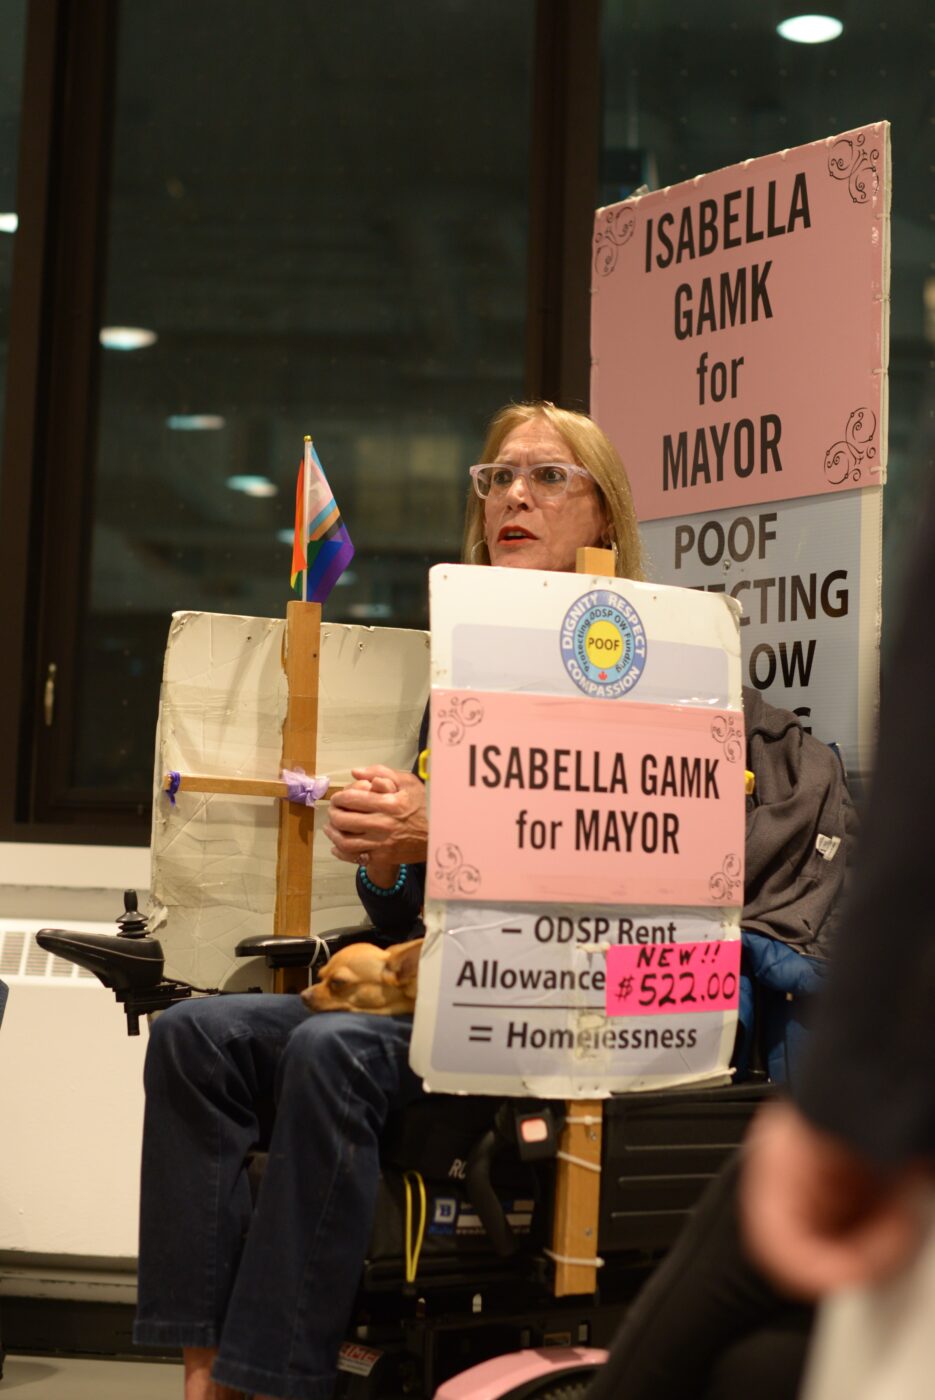 A woman with signs running for mayor speaks from her wheelchair.